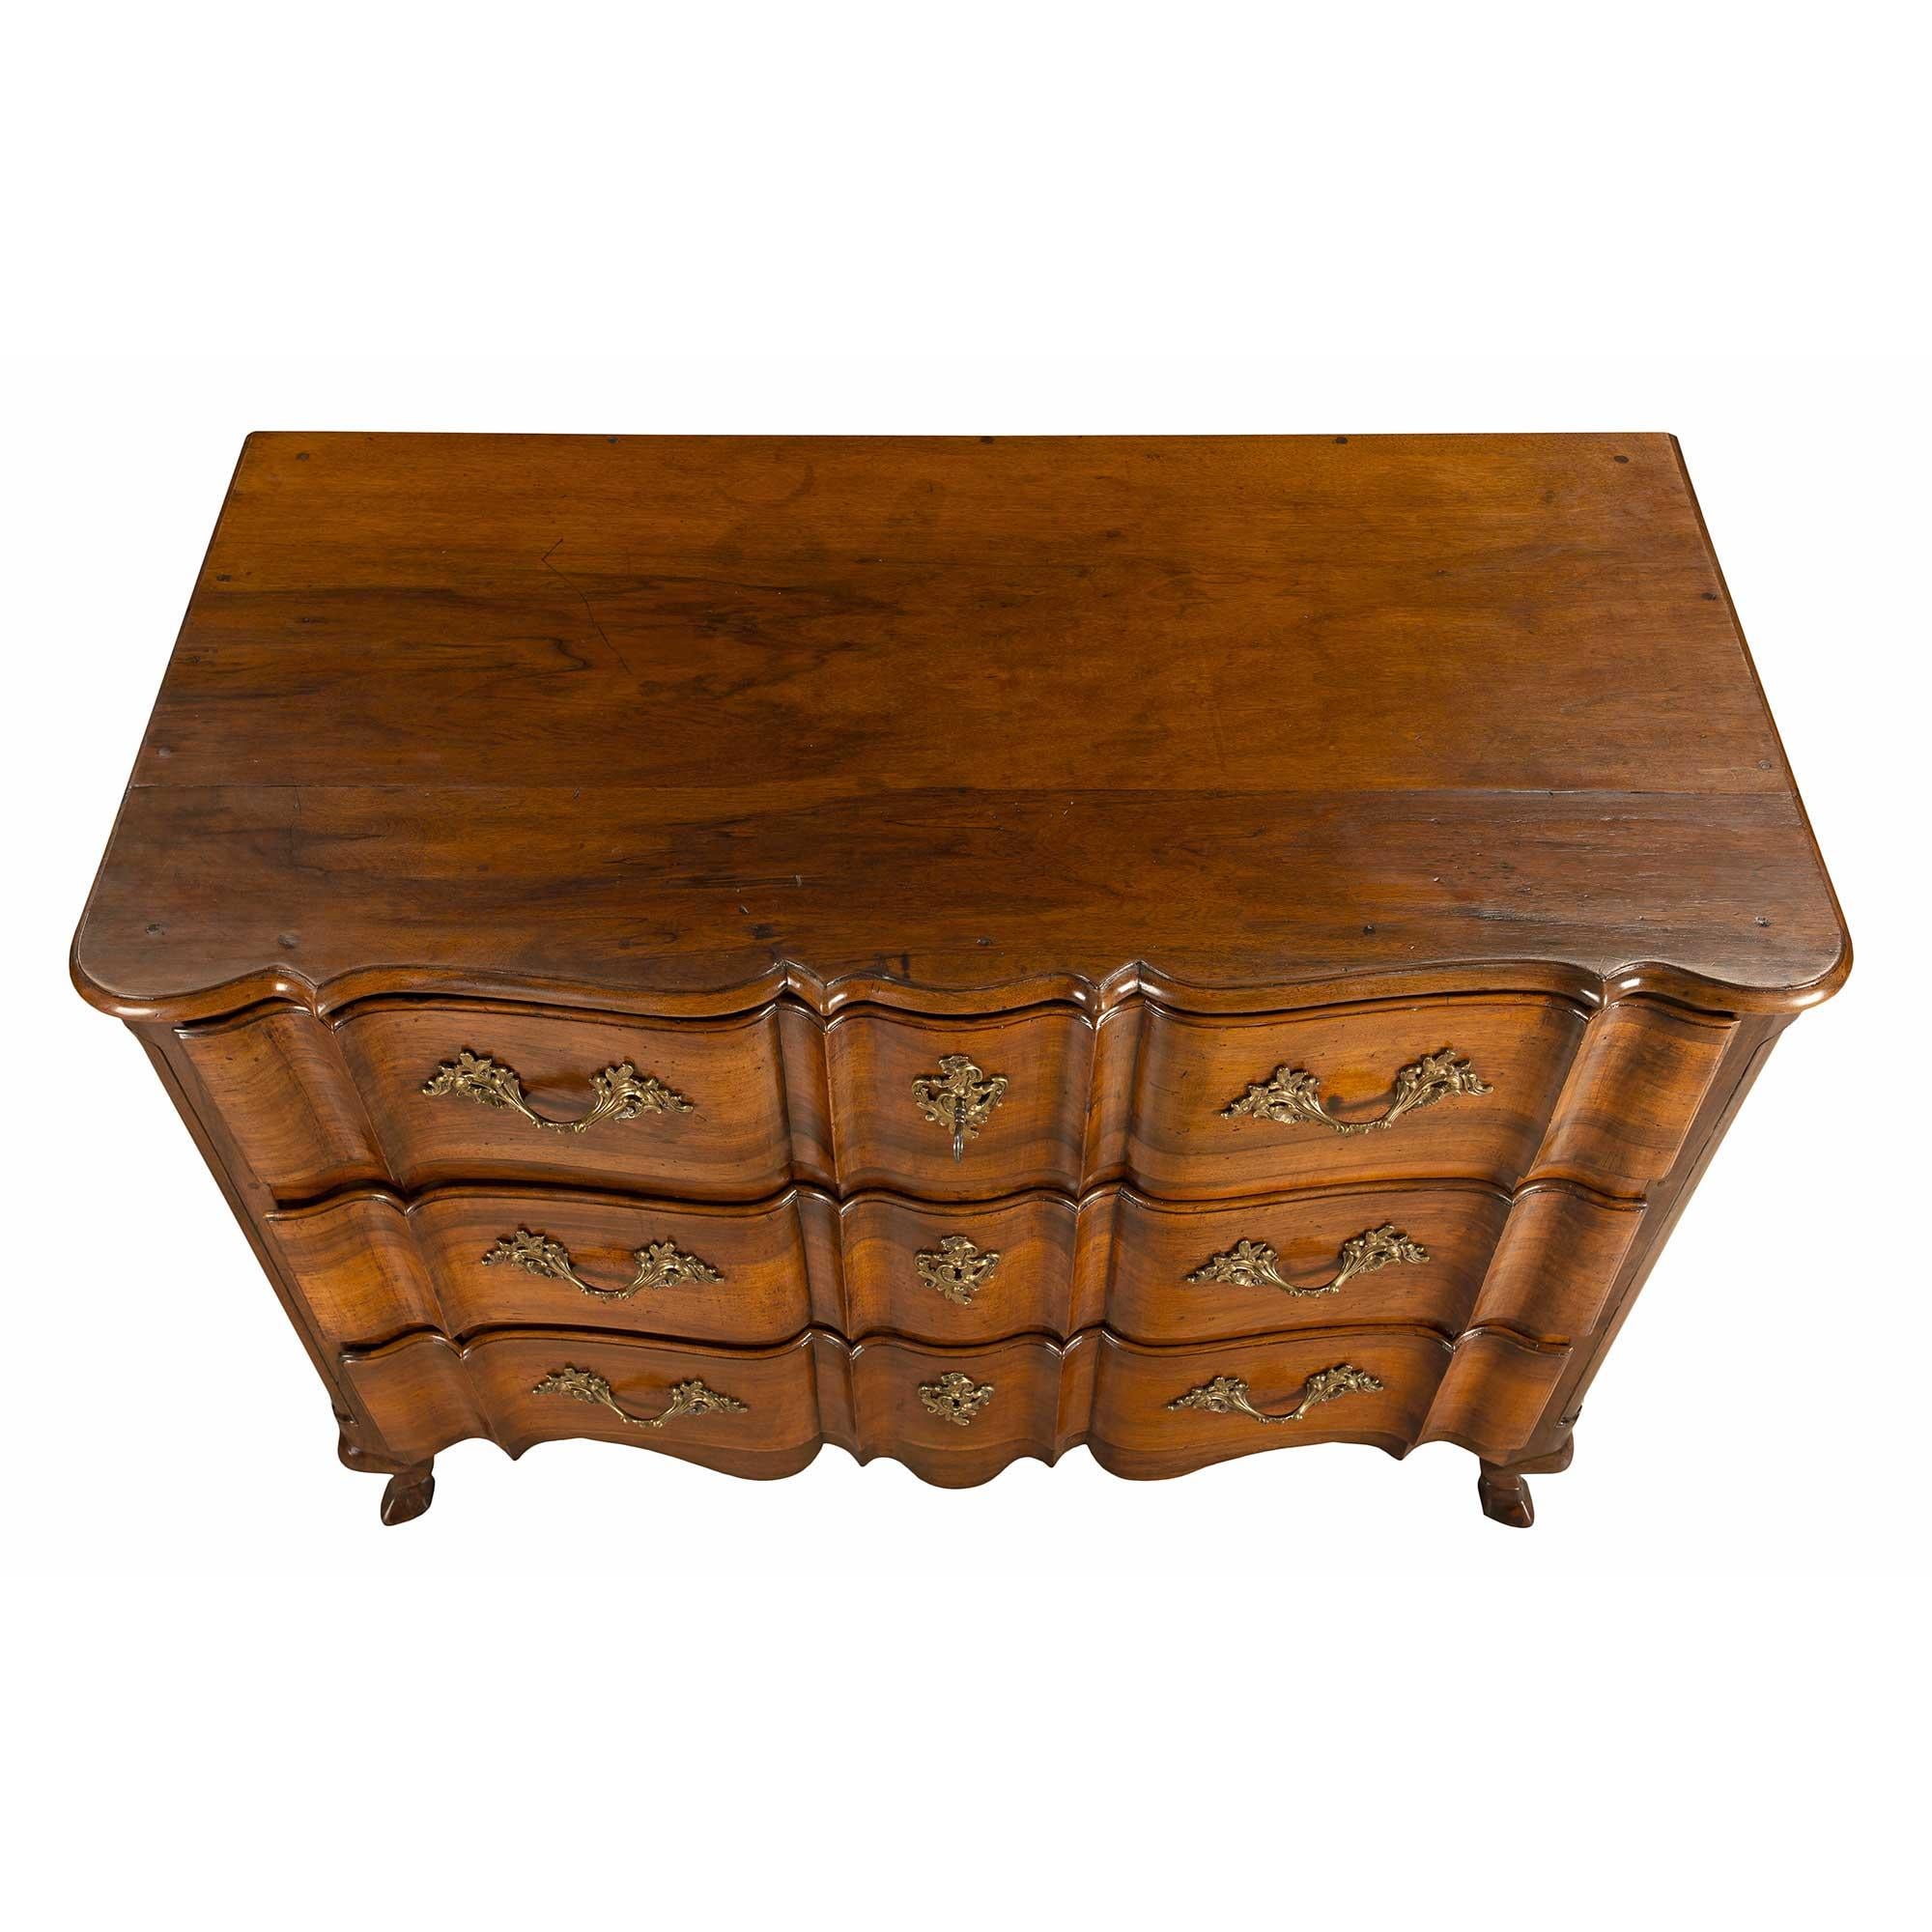 A handsome and most elegant Country French 18th century walnut three-drawer commode. The chest is raised by fine scrolled legs with carved hoof feet. Above the beautiful scallop-shaped frieze are three drawers with a most decorative and unique shape